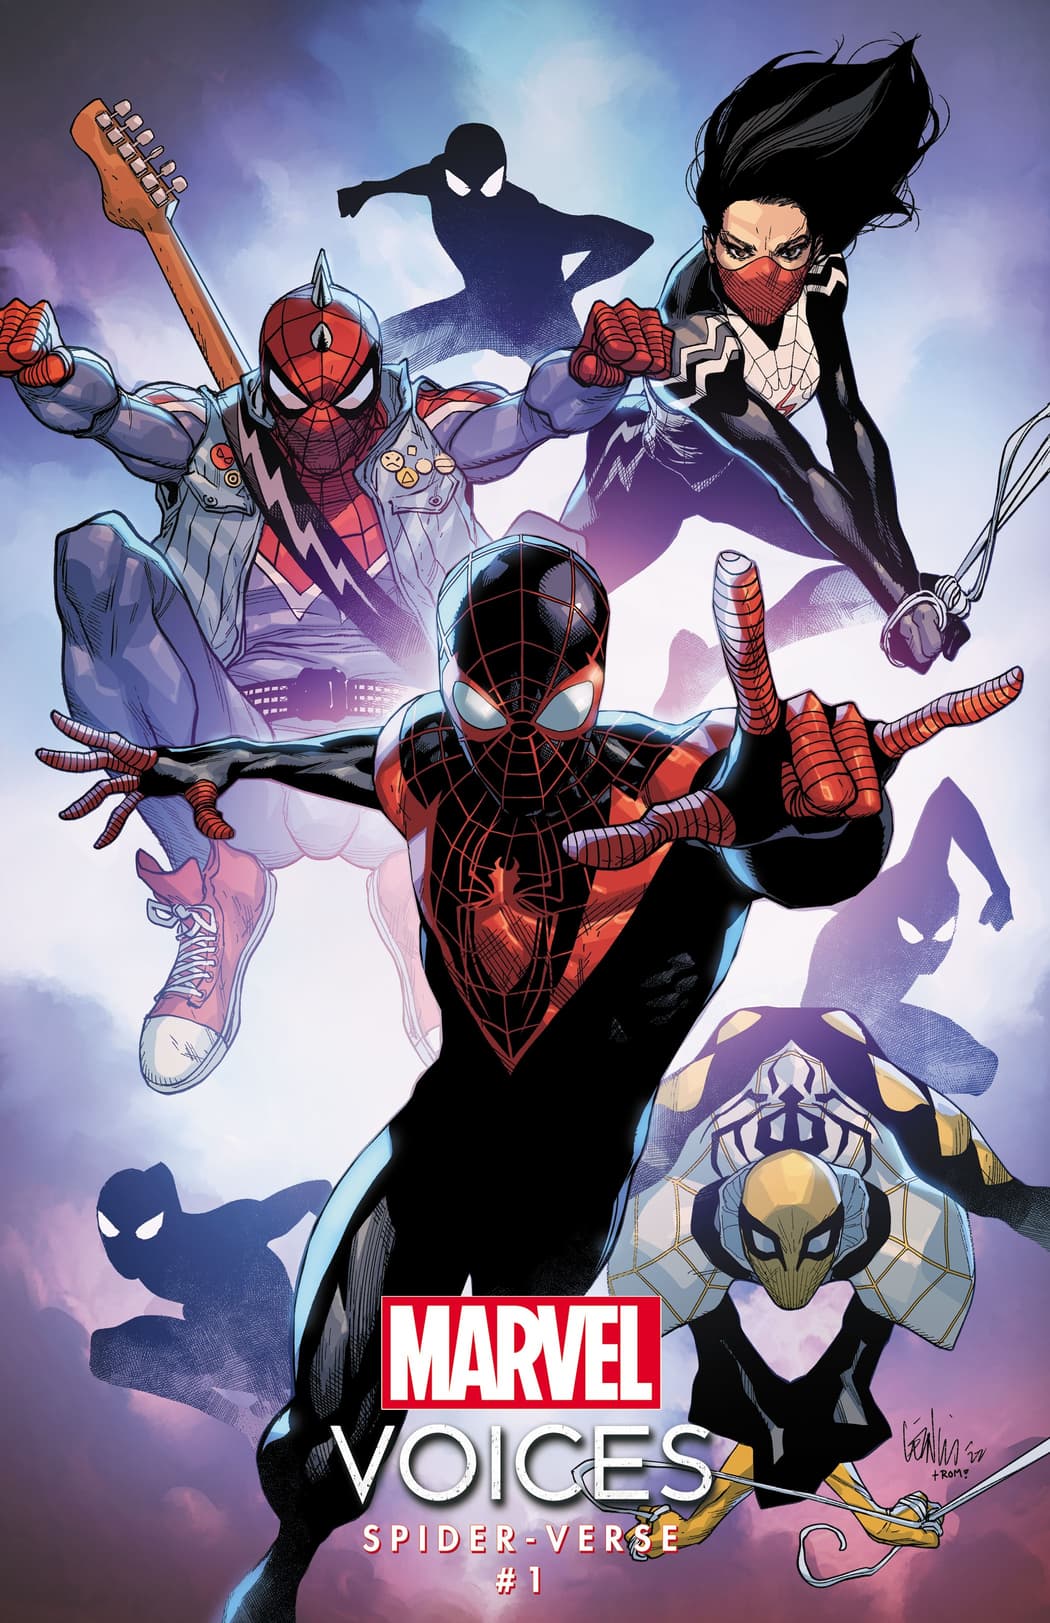 MARVEL’S VOICES: SPIDER-VERSE #1 cover by Leinil Francis Yu